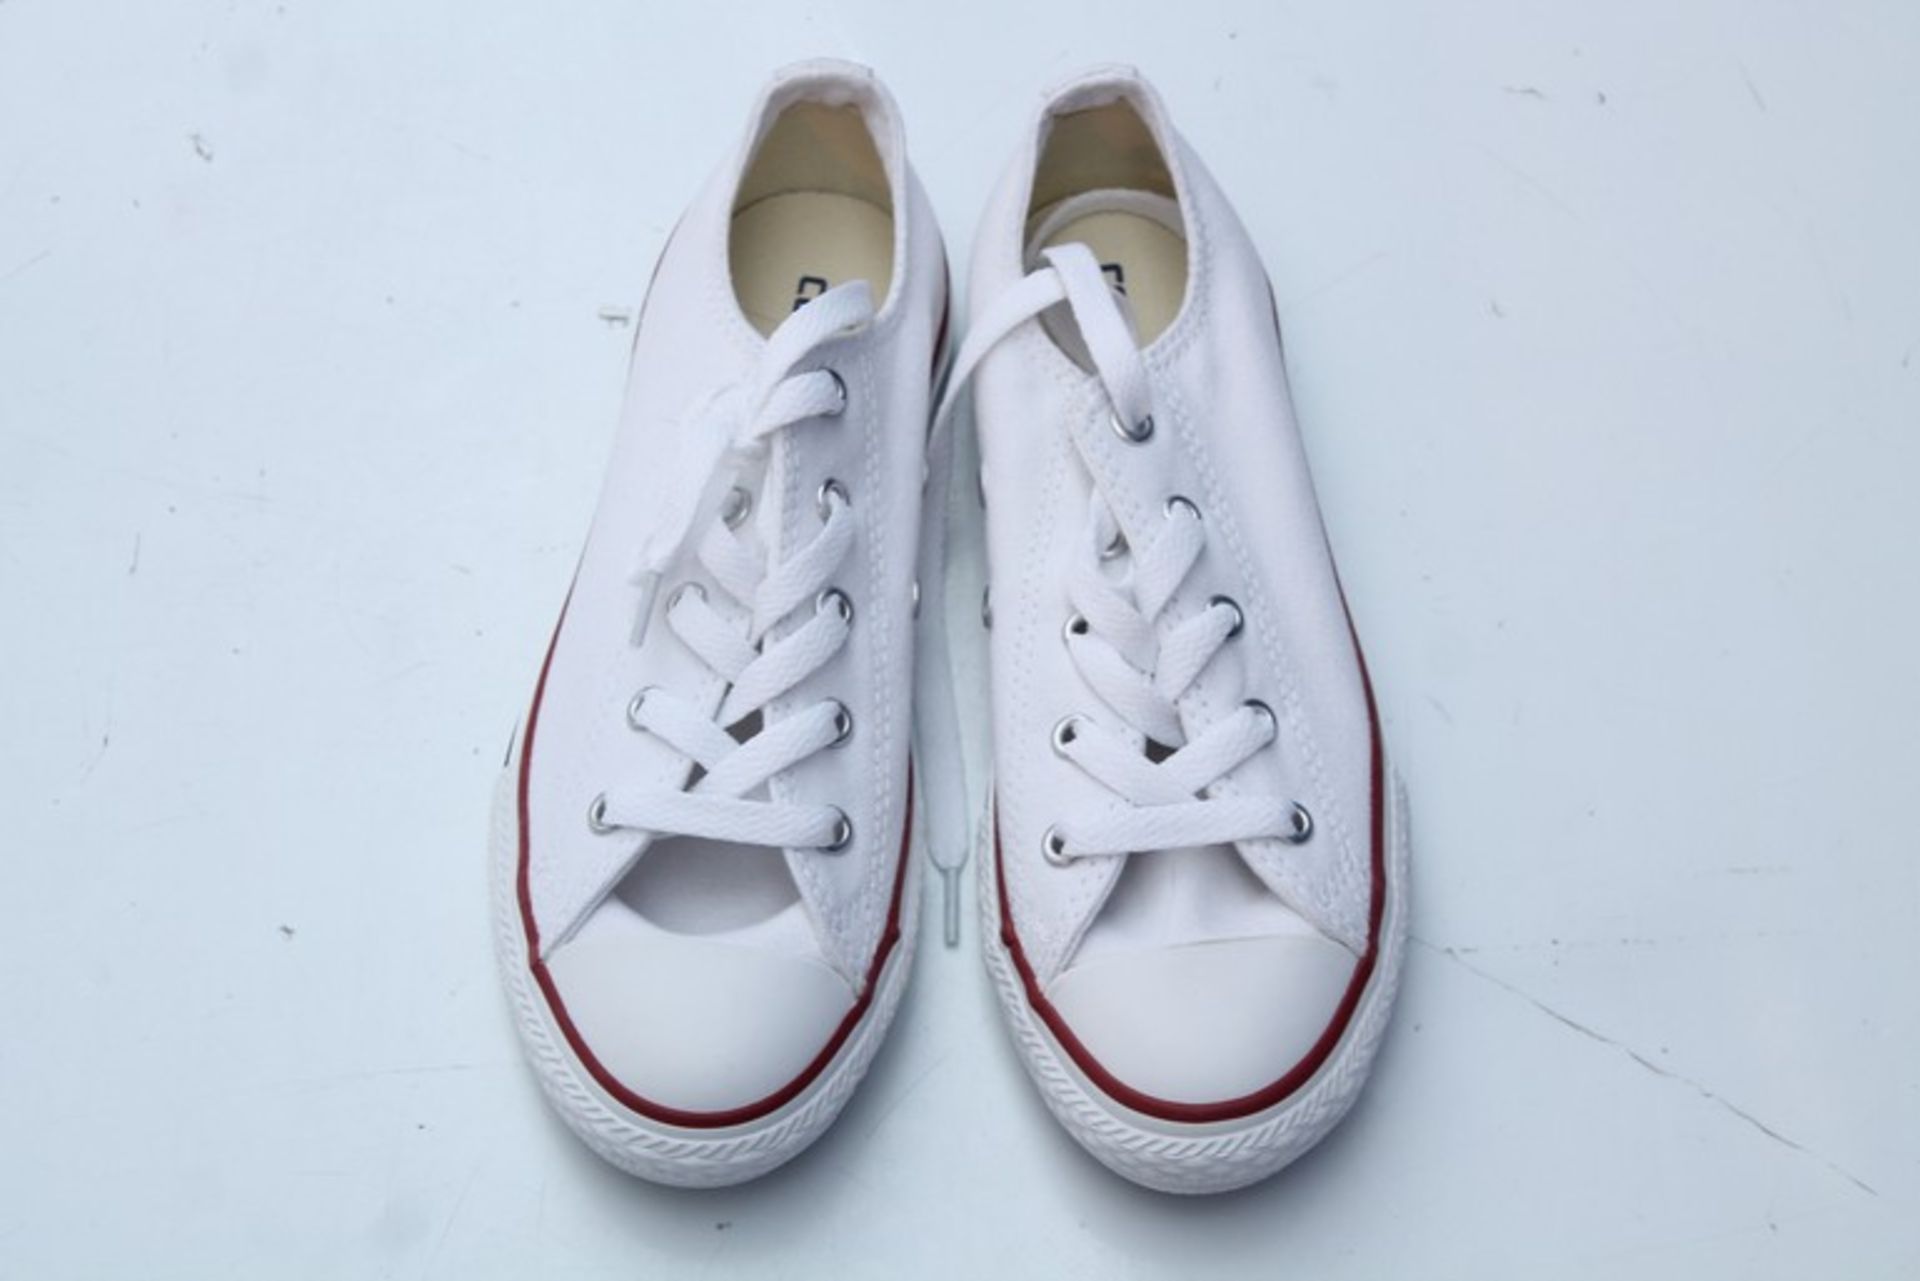 1 x BOXED PAIR OF SIZE 1 AND A HALF YOUTHS CONVERSE PUMPS IN WHITE   *PLEASE NOTE THAT THE BID PRICE